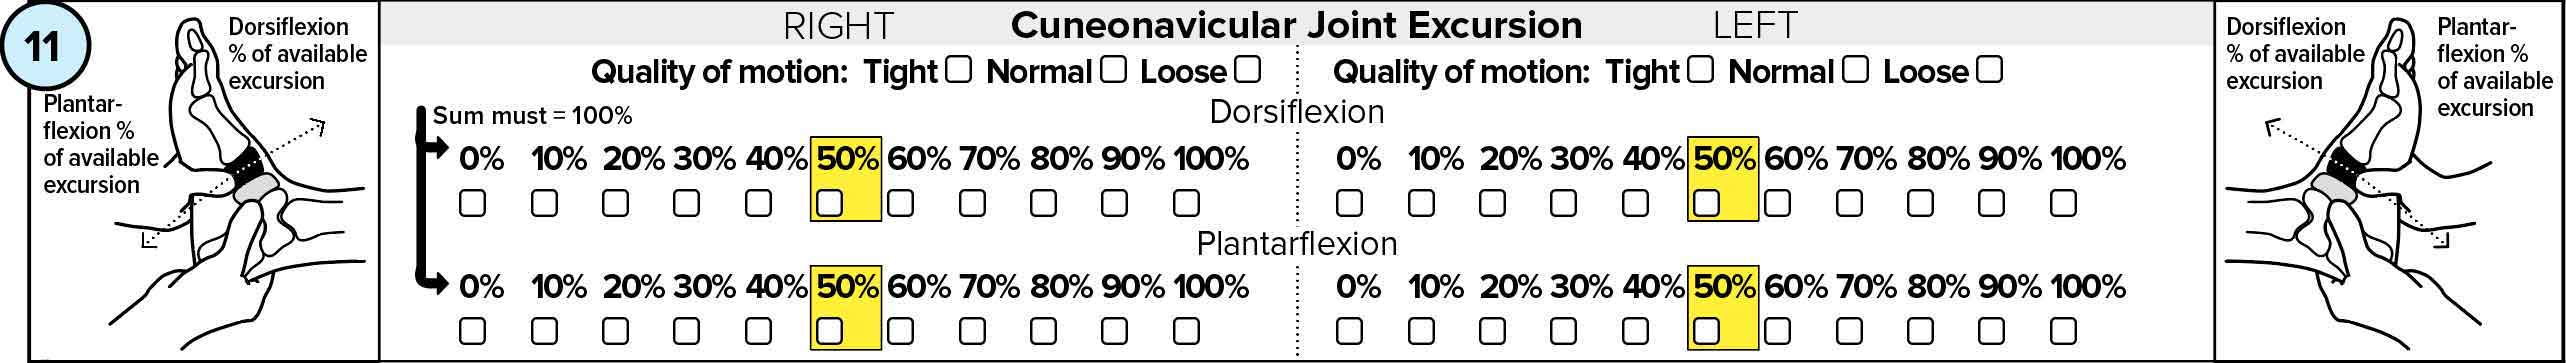 Cuneonavicular Joint Excursion